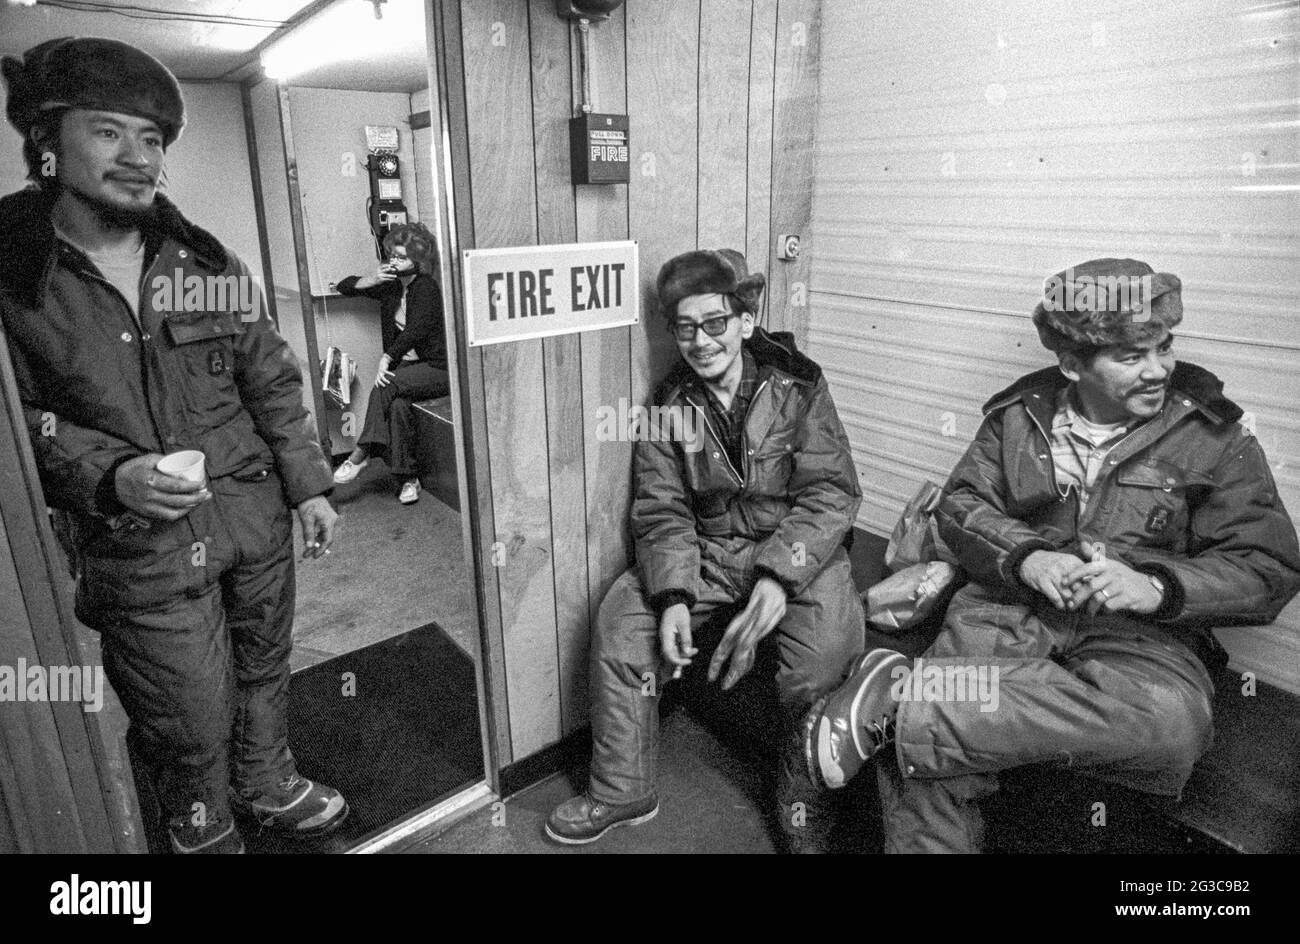 Wearing winter coats and fur hats, oil field workers in Prudhoe Bay, Alaska, relax indoors after an outdoor working shift. Stock Photo